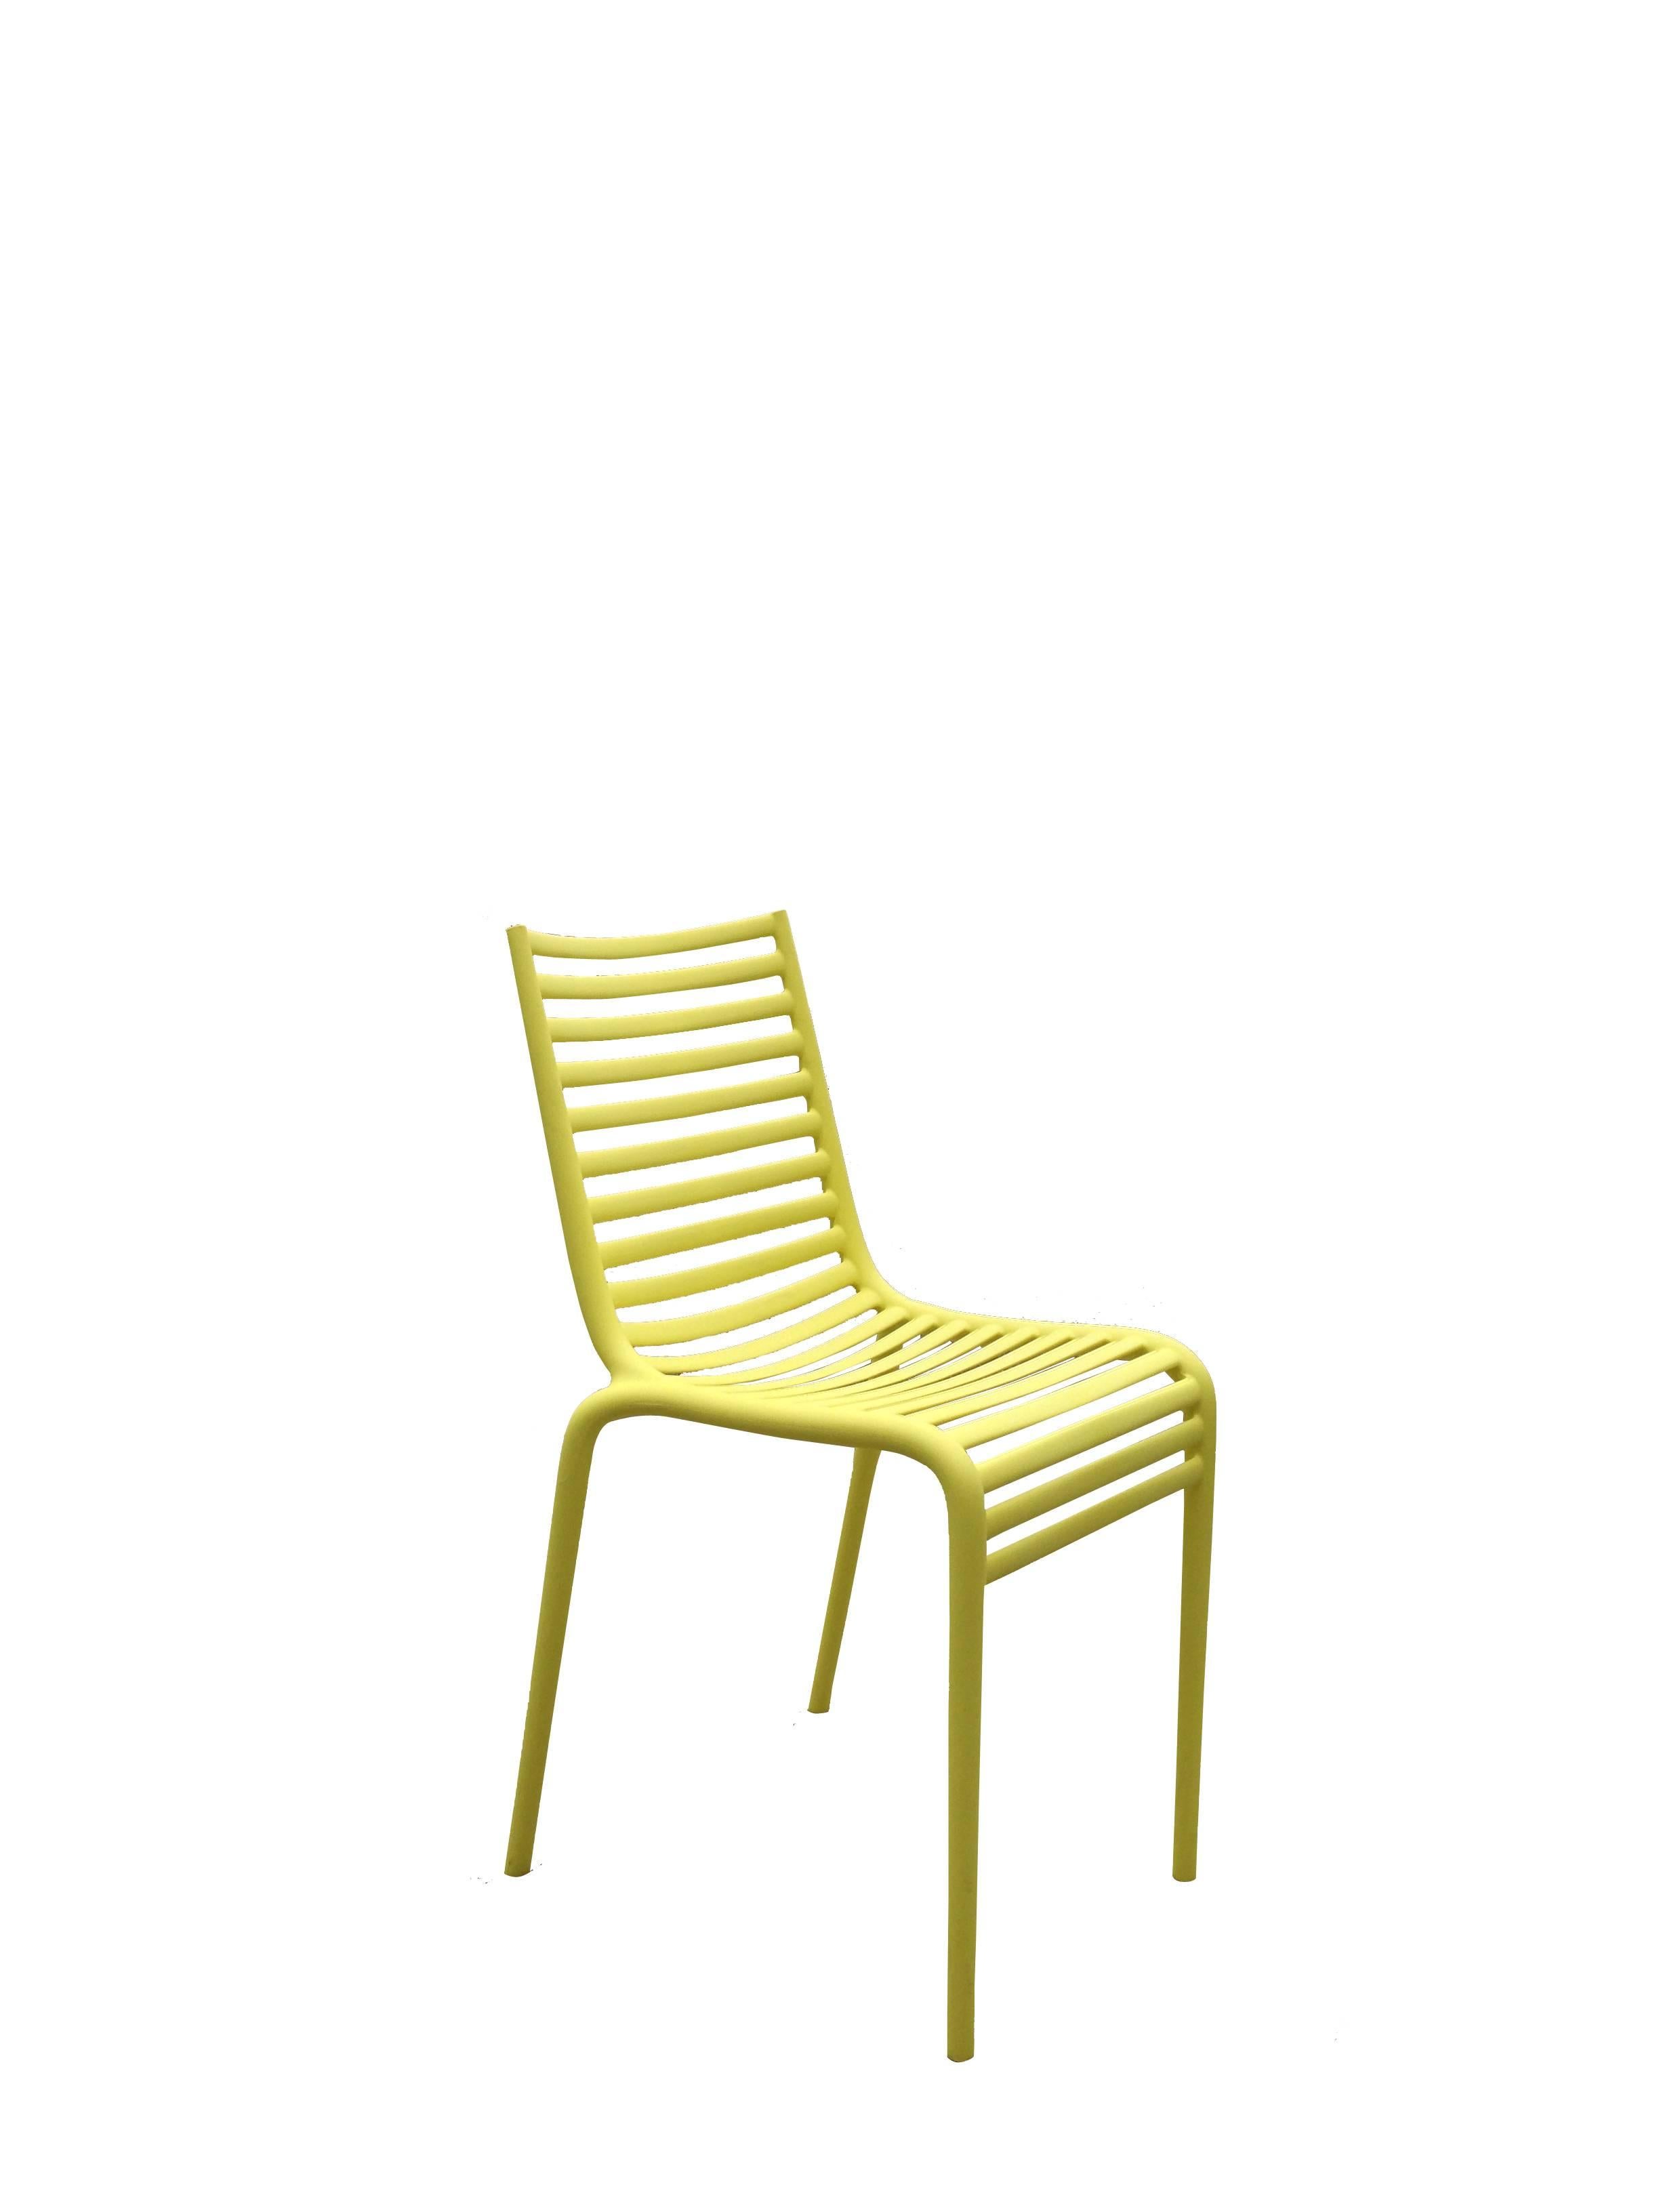 philippe starck outdoor chairs